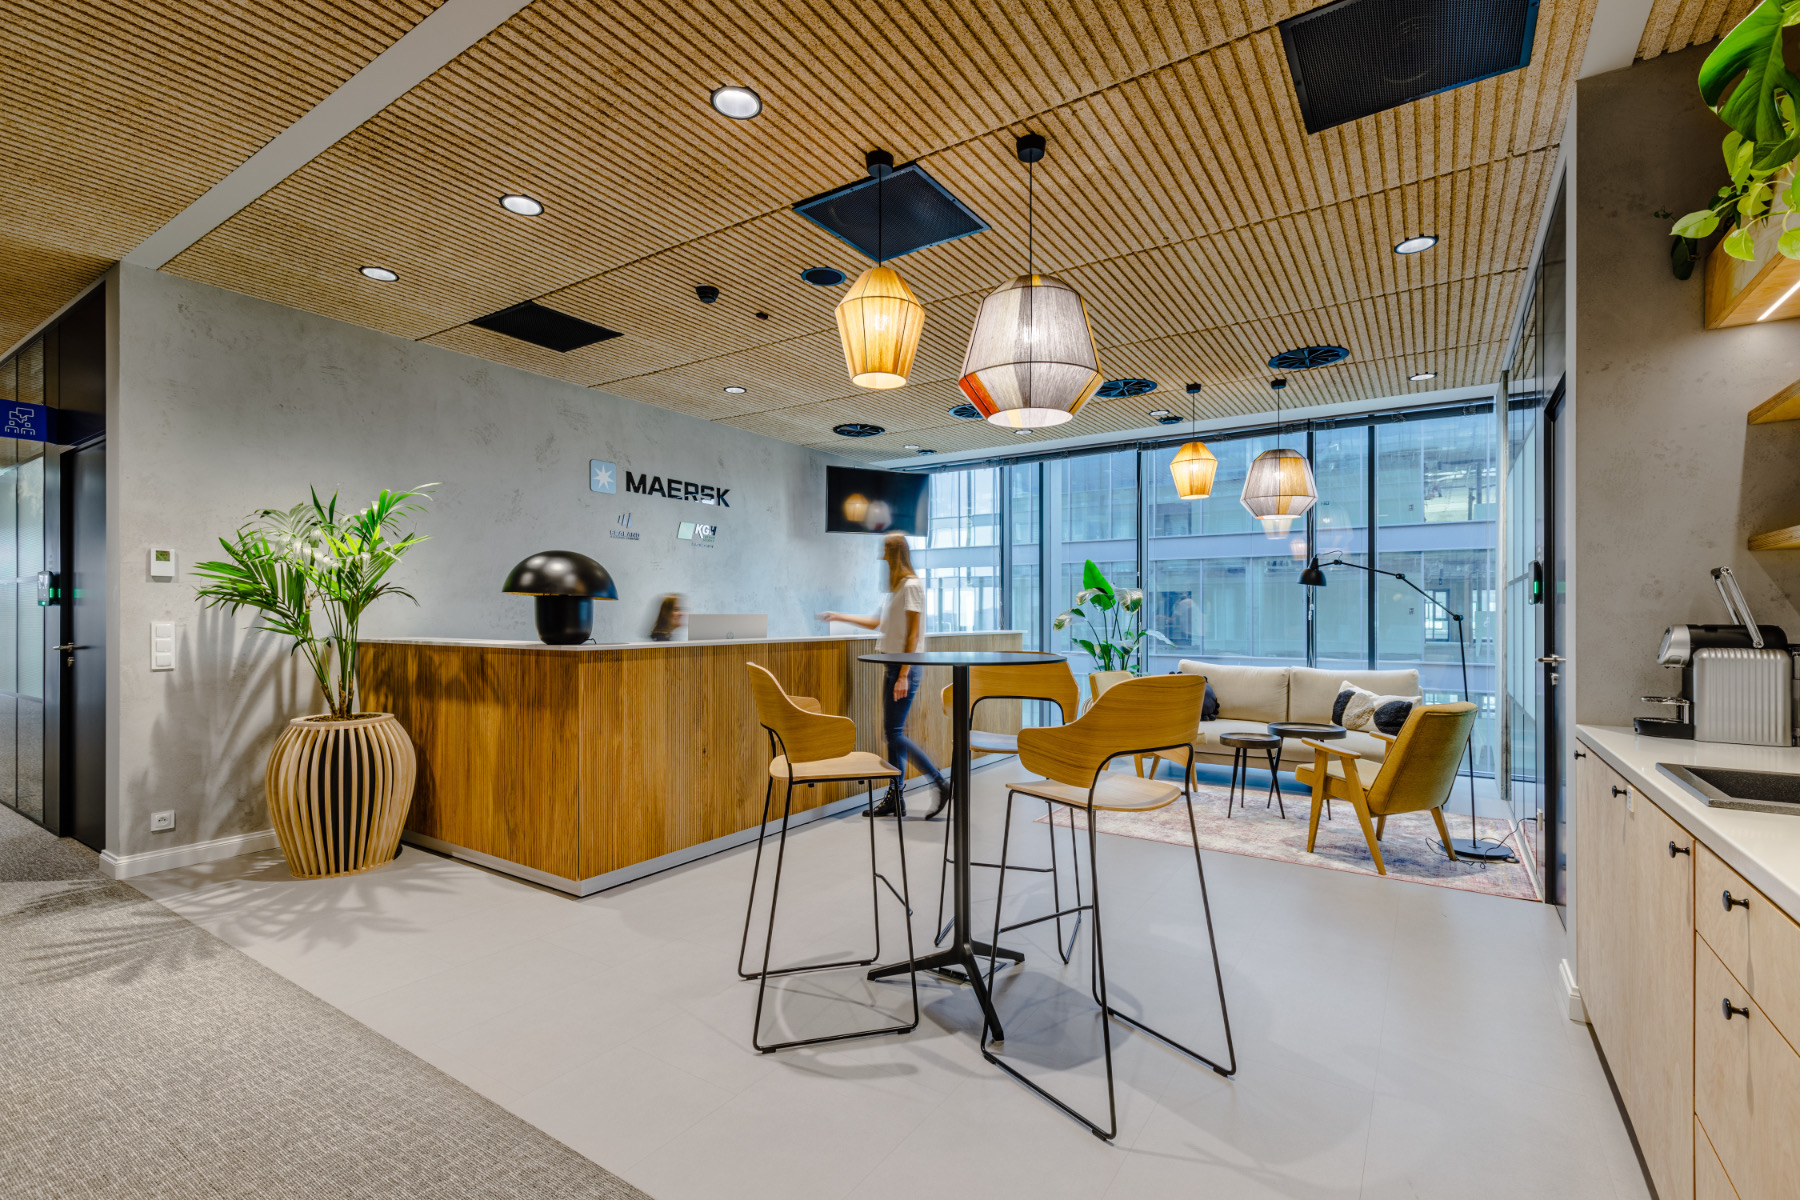 A Tour of Maersk’s New Gdynia Office